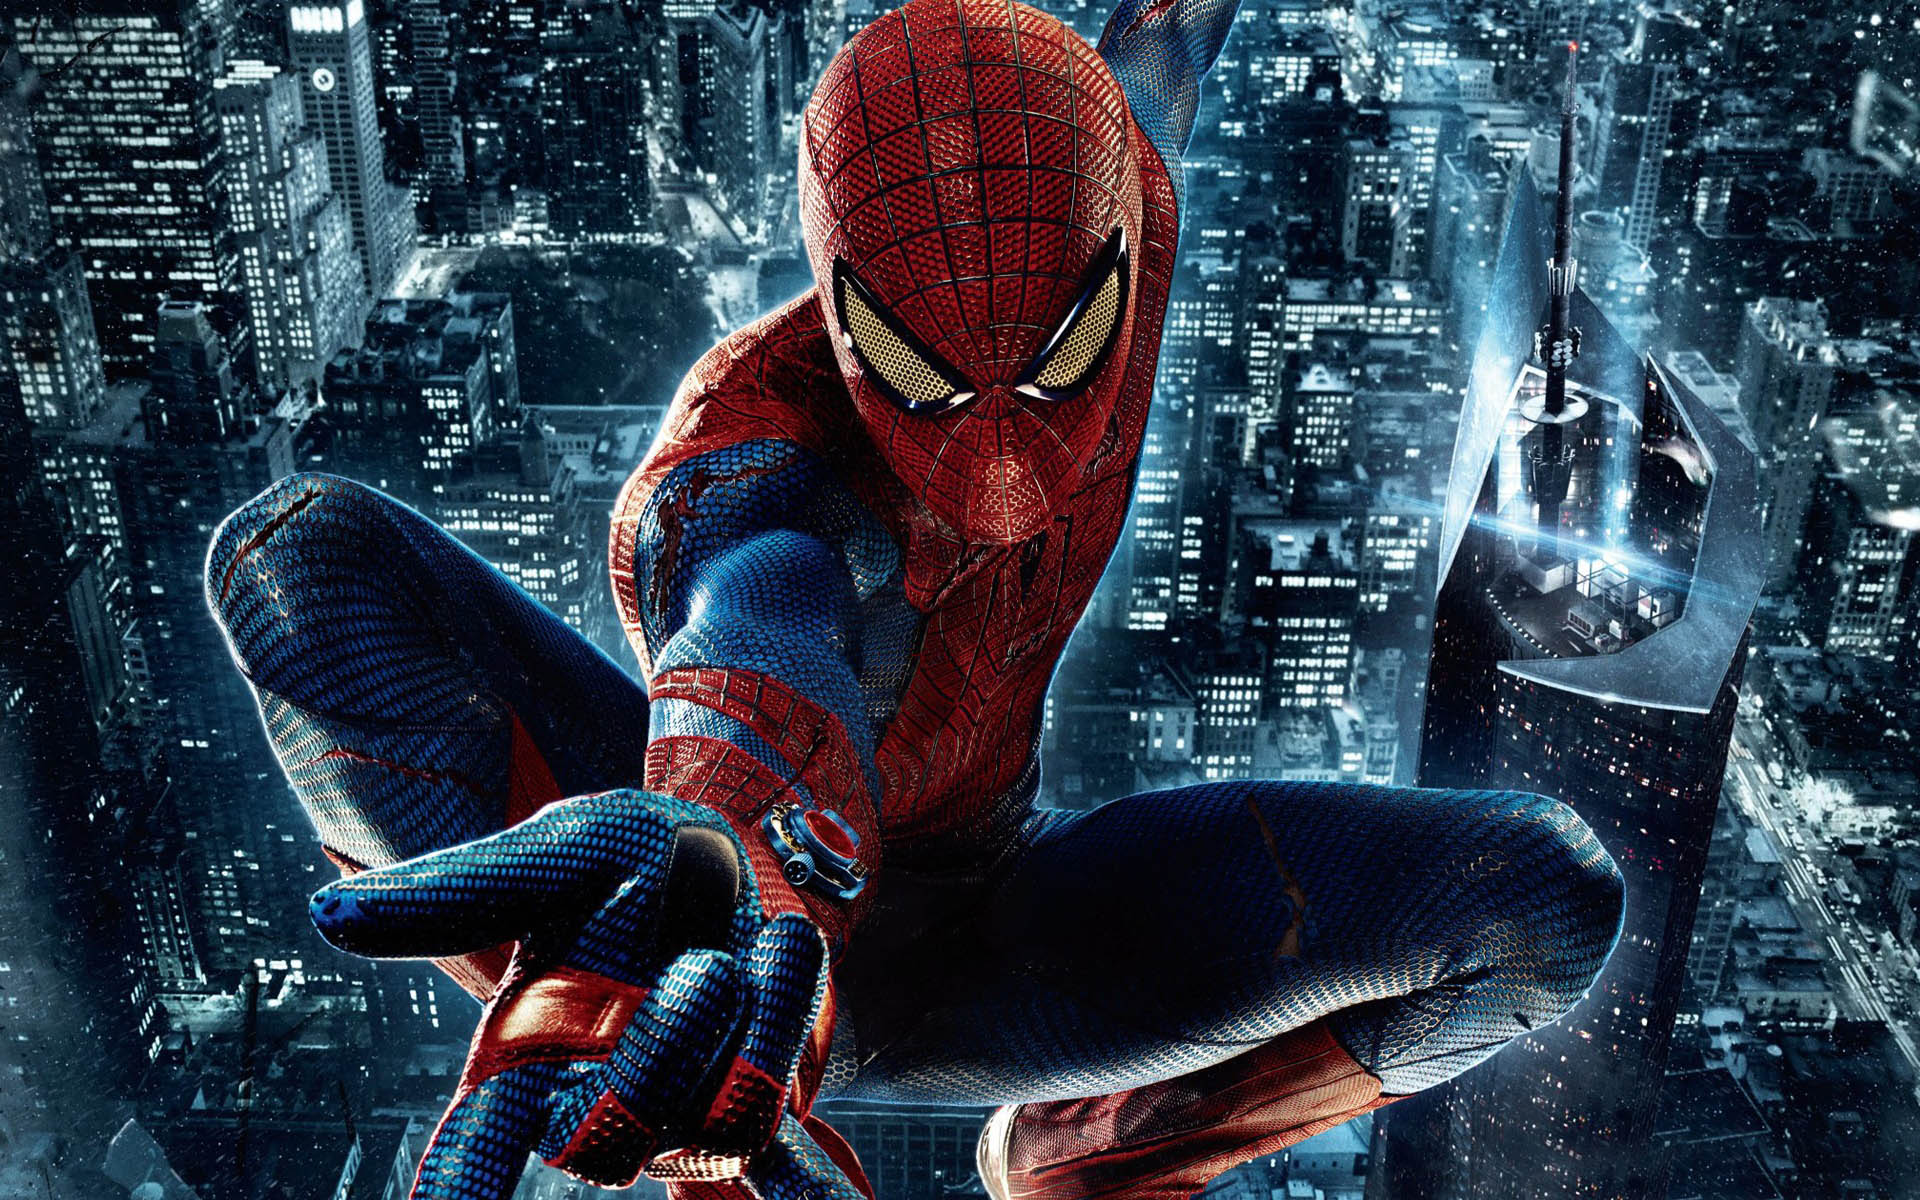 Horrible Bosses Writers To Pen New Spider-Man Movie